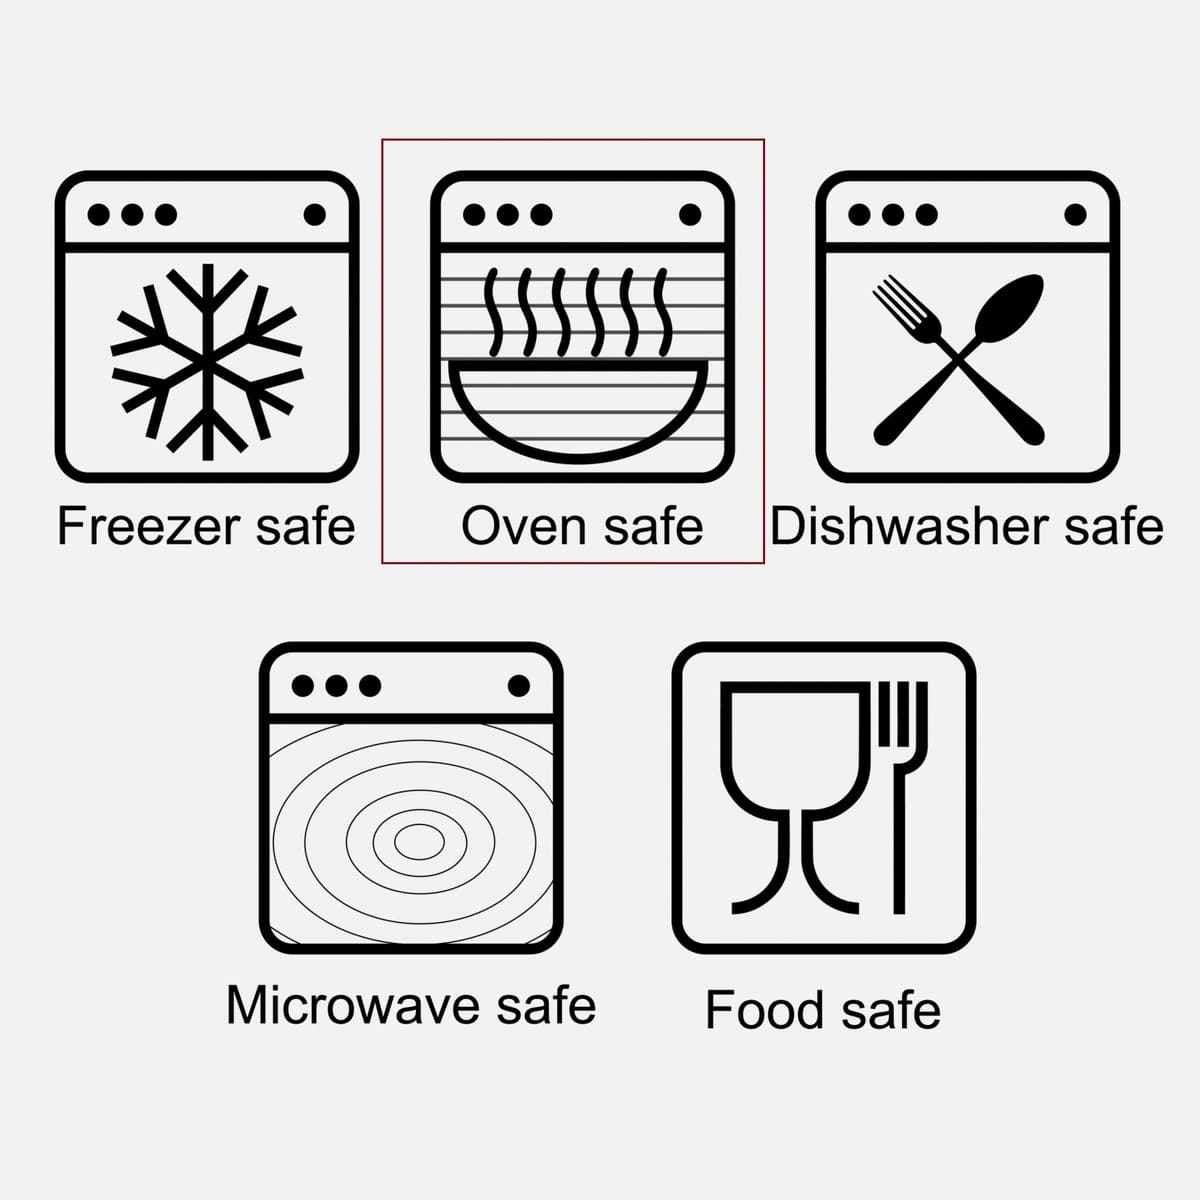 what does the oven safe symbol mean